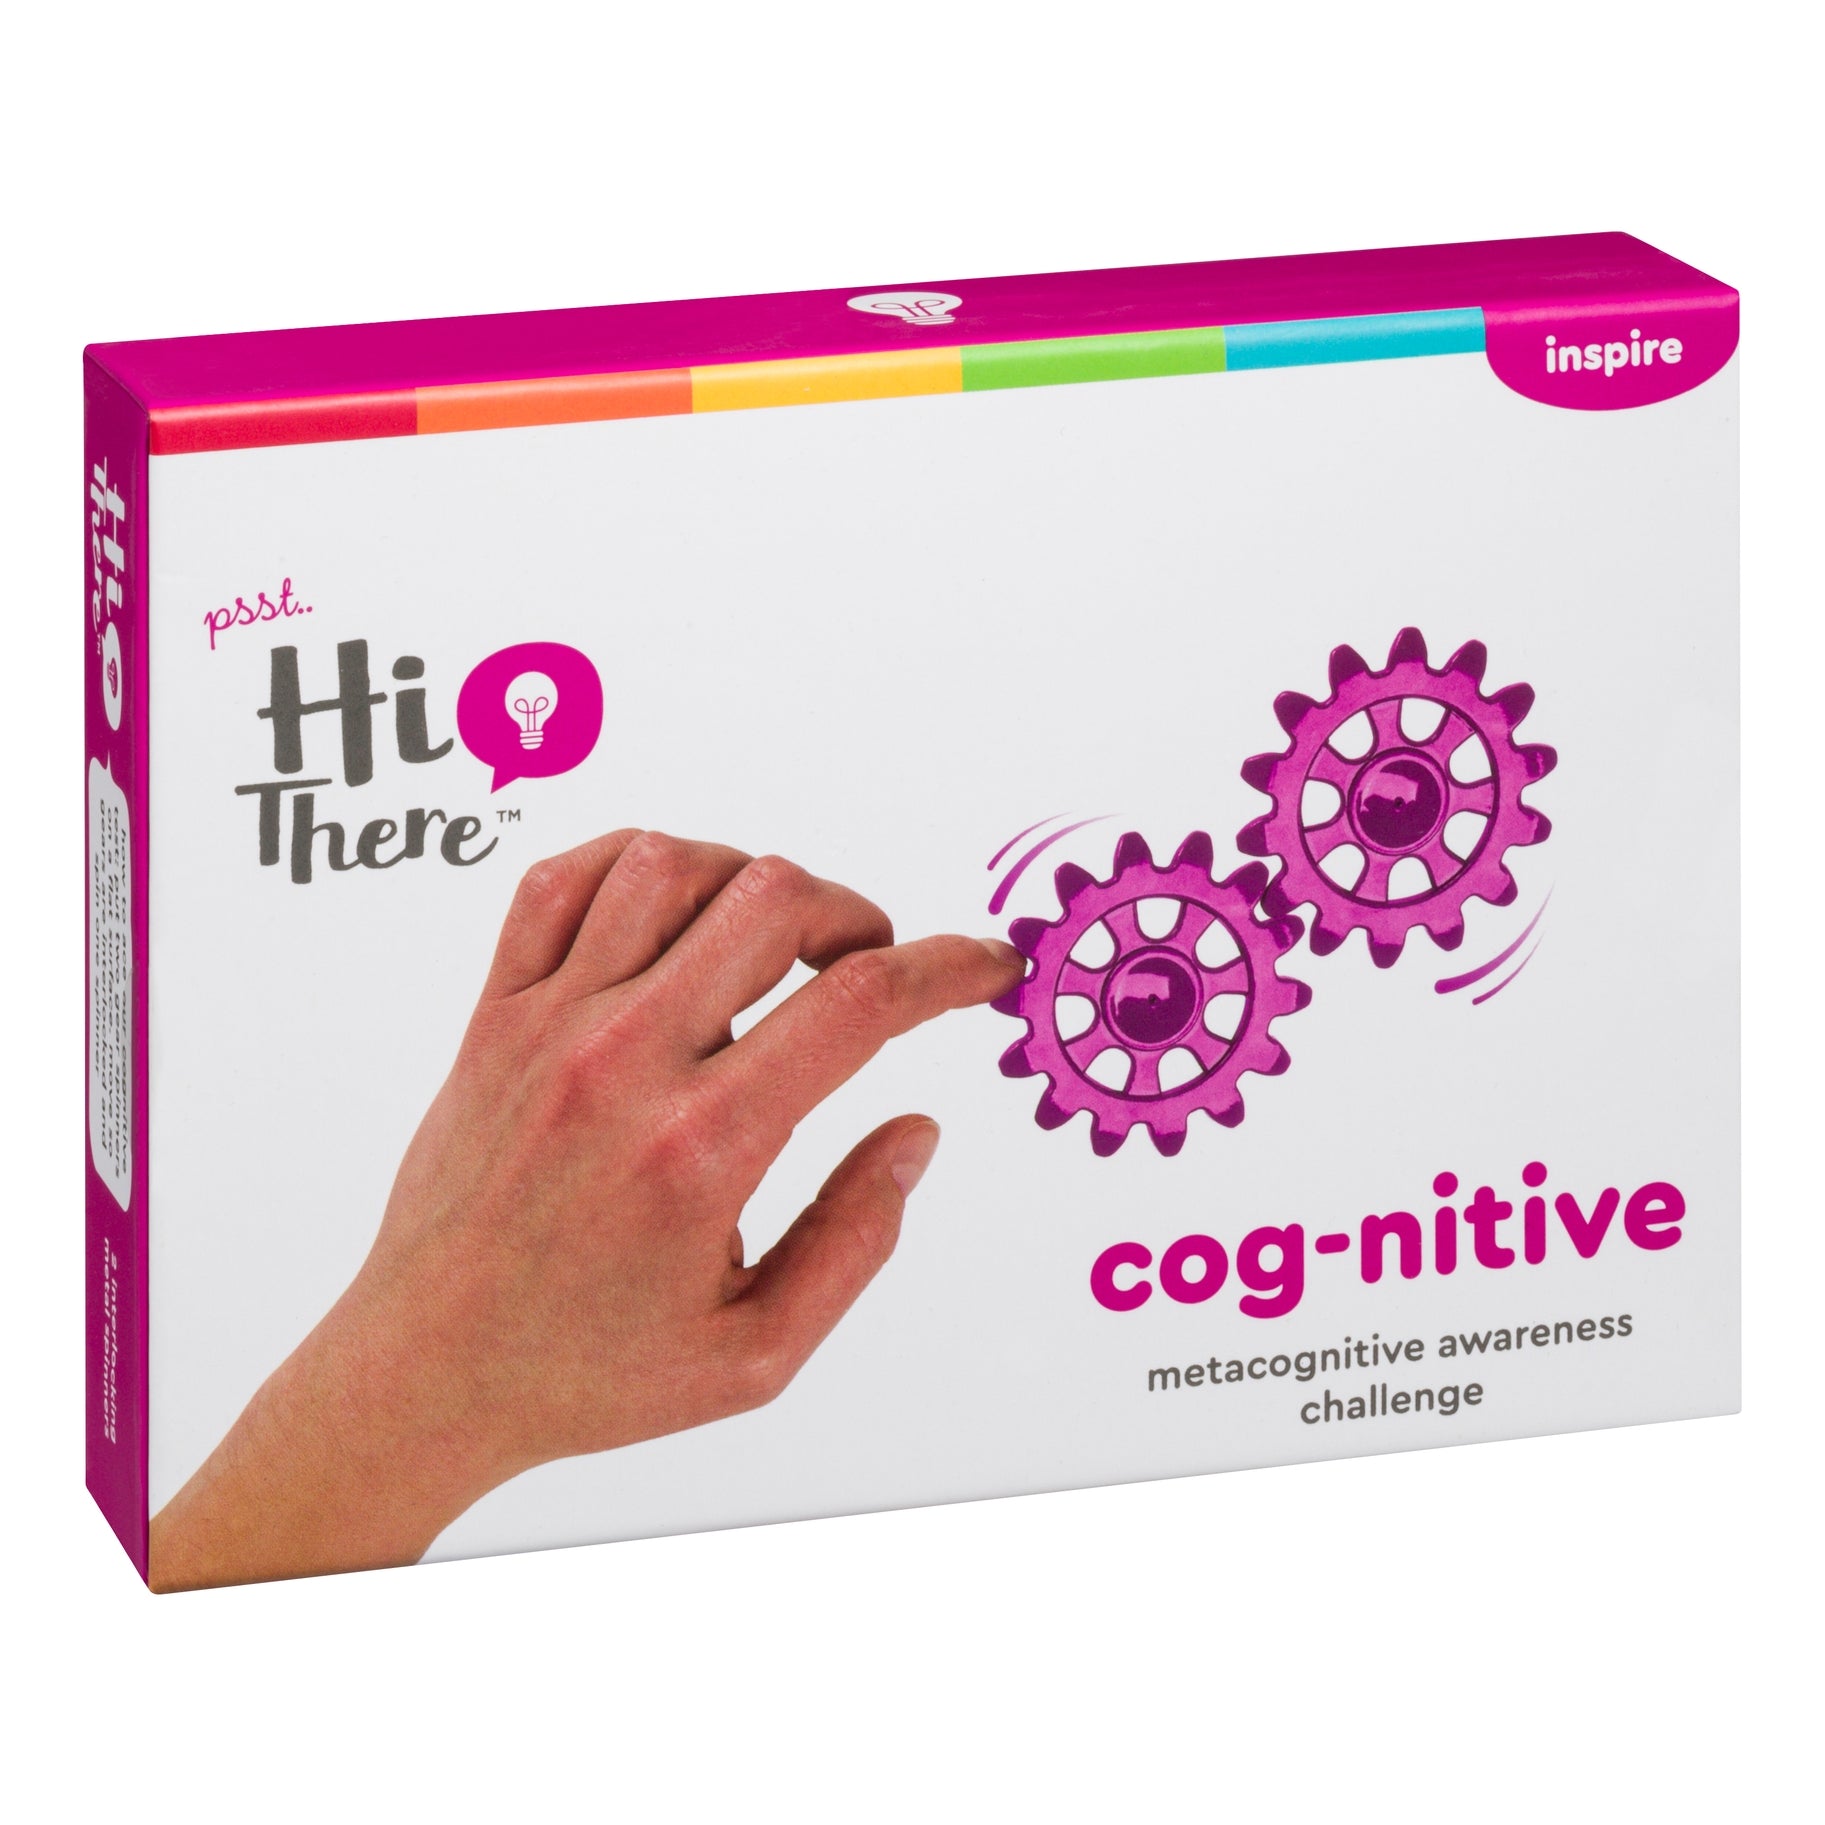 The box retail packaging for the “Cog-Nitive” Fidget Toy, on a white background.